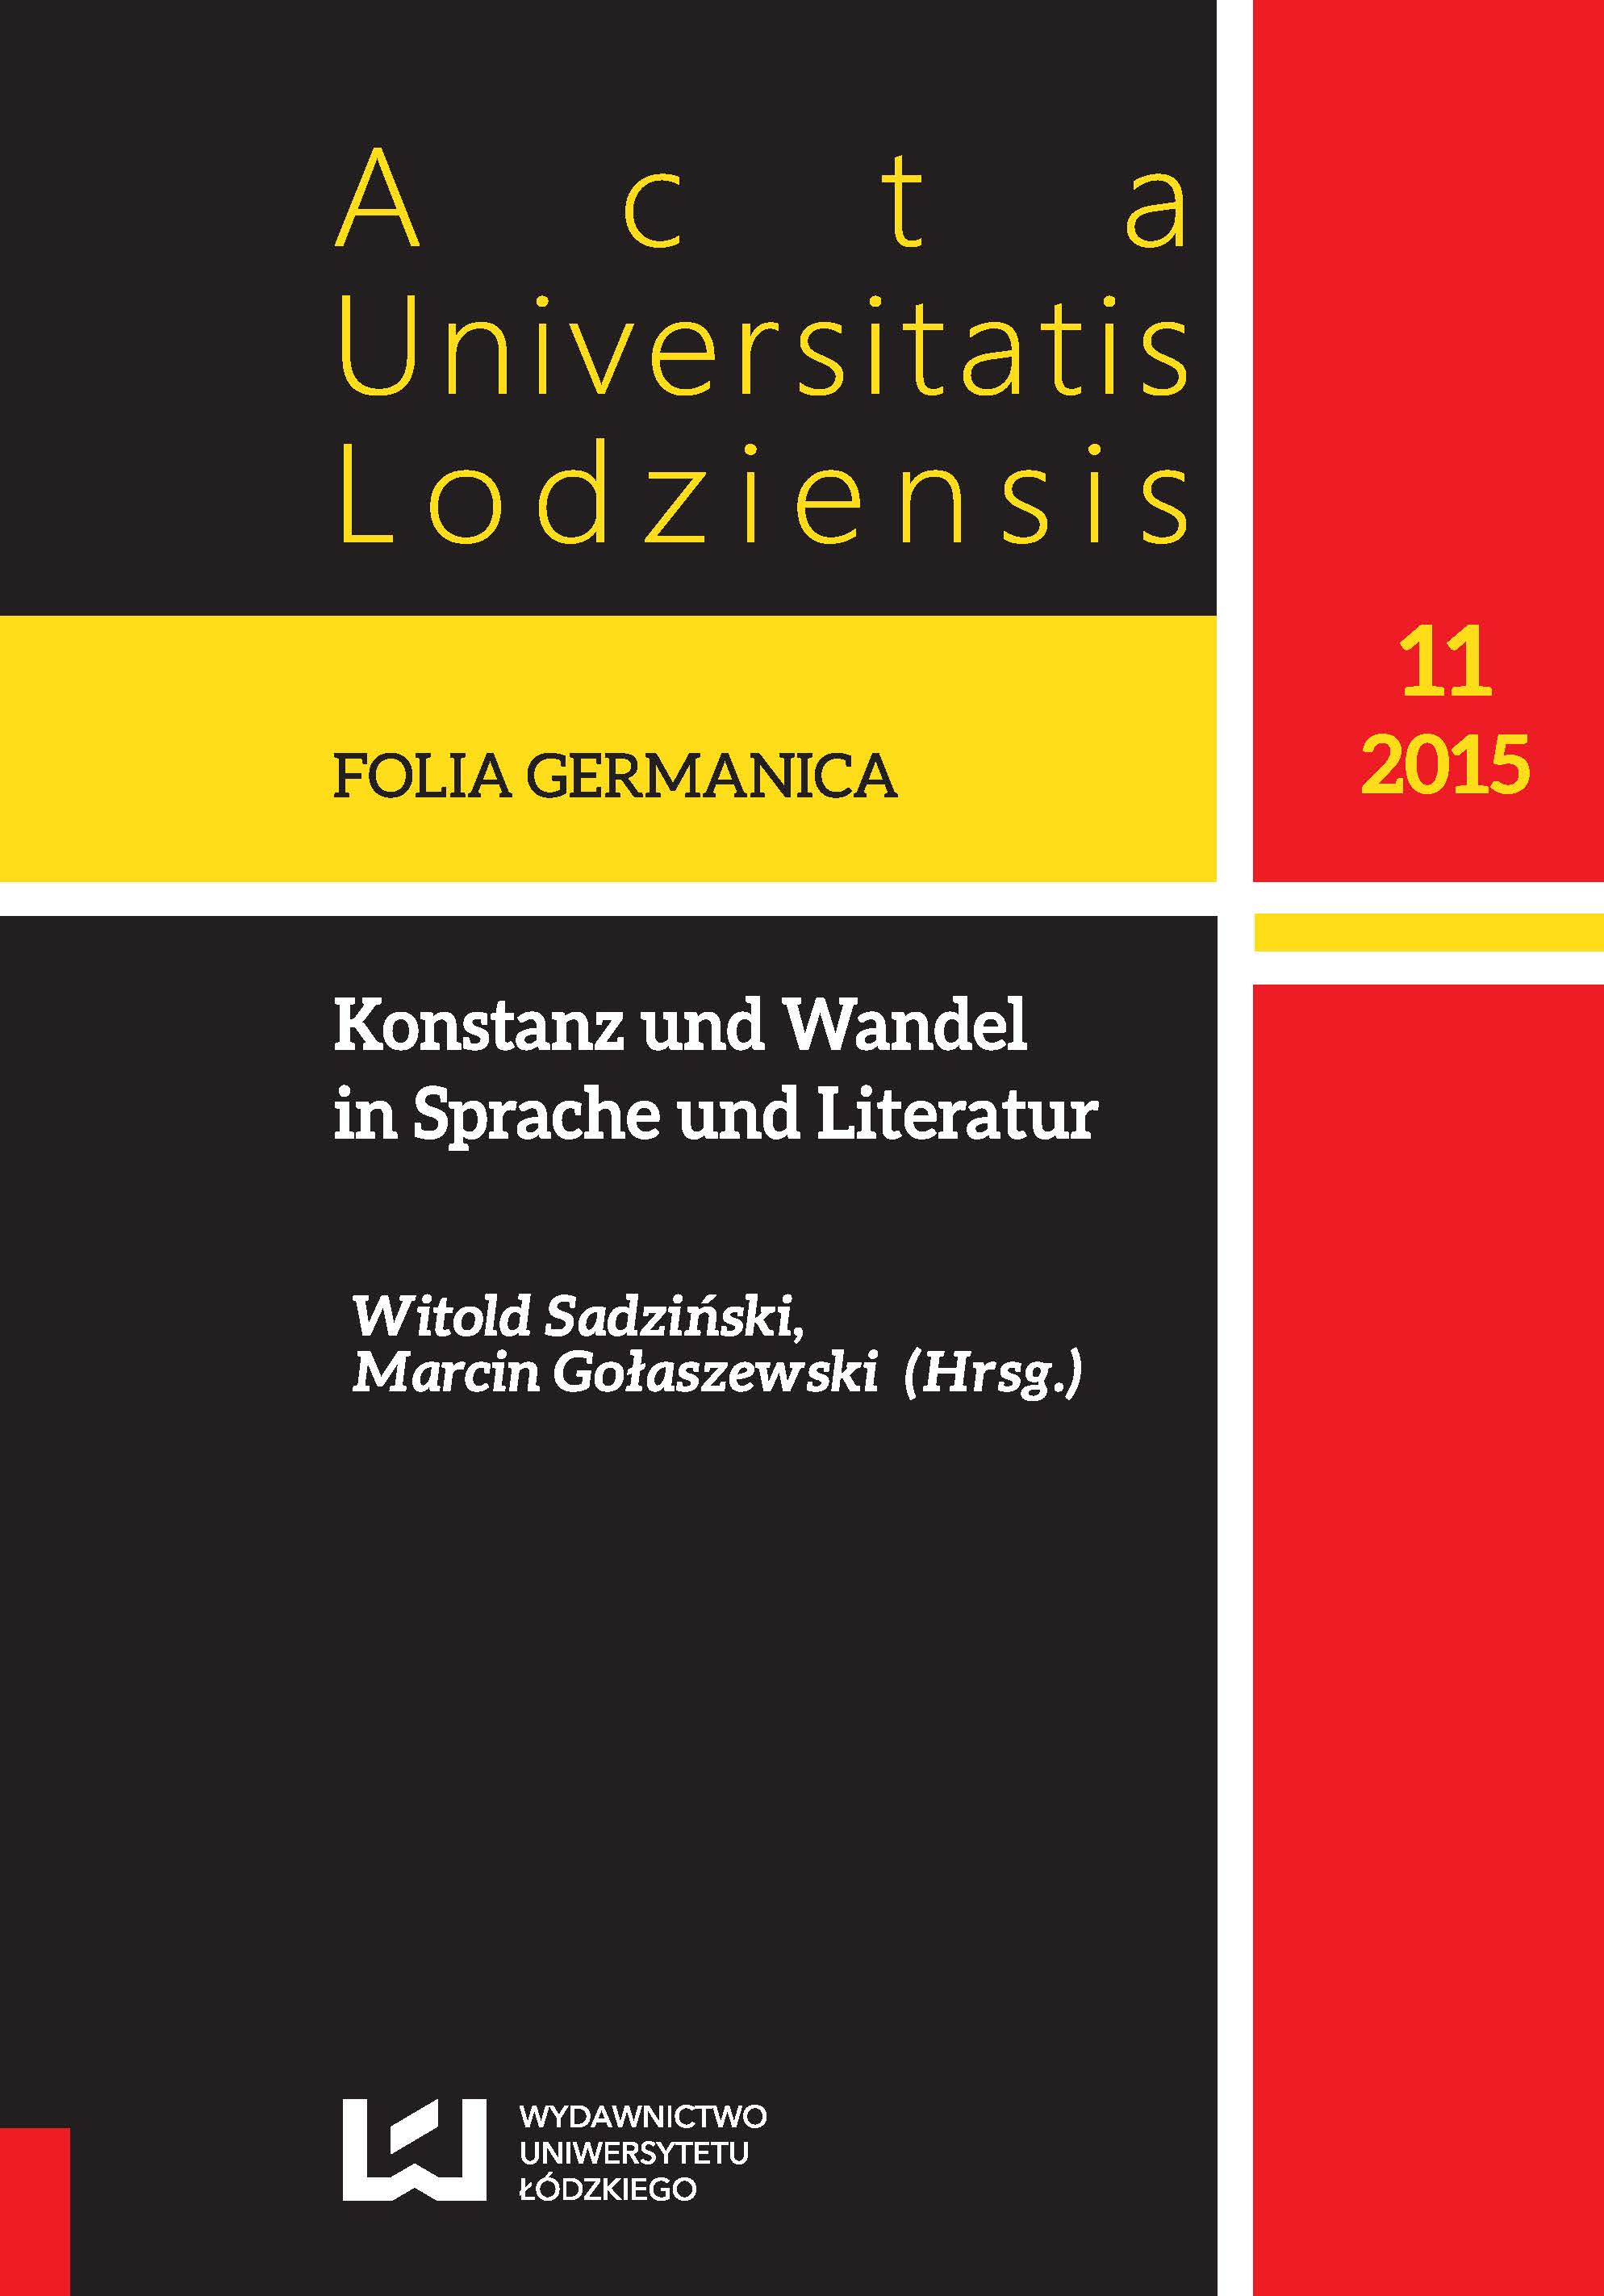 Constancy and changeability in the lexicographic description of chosen German loanwords in the category building industry in ‘Słownik języka polskiego’ edited by Witold Doroszewski and in ‘Słownik języka polskiego’ PWN edited by Elżbieta Sobol Cover Image